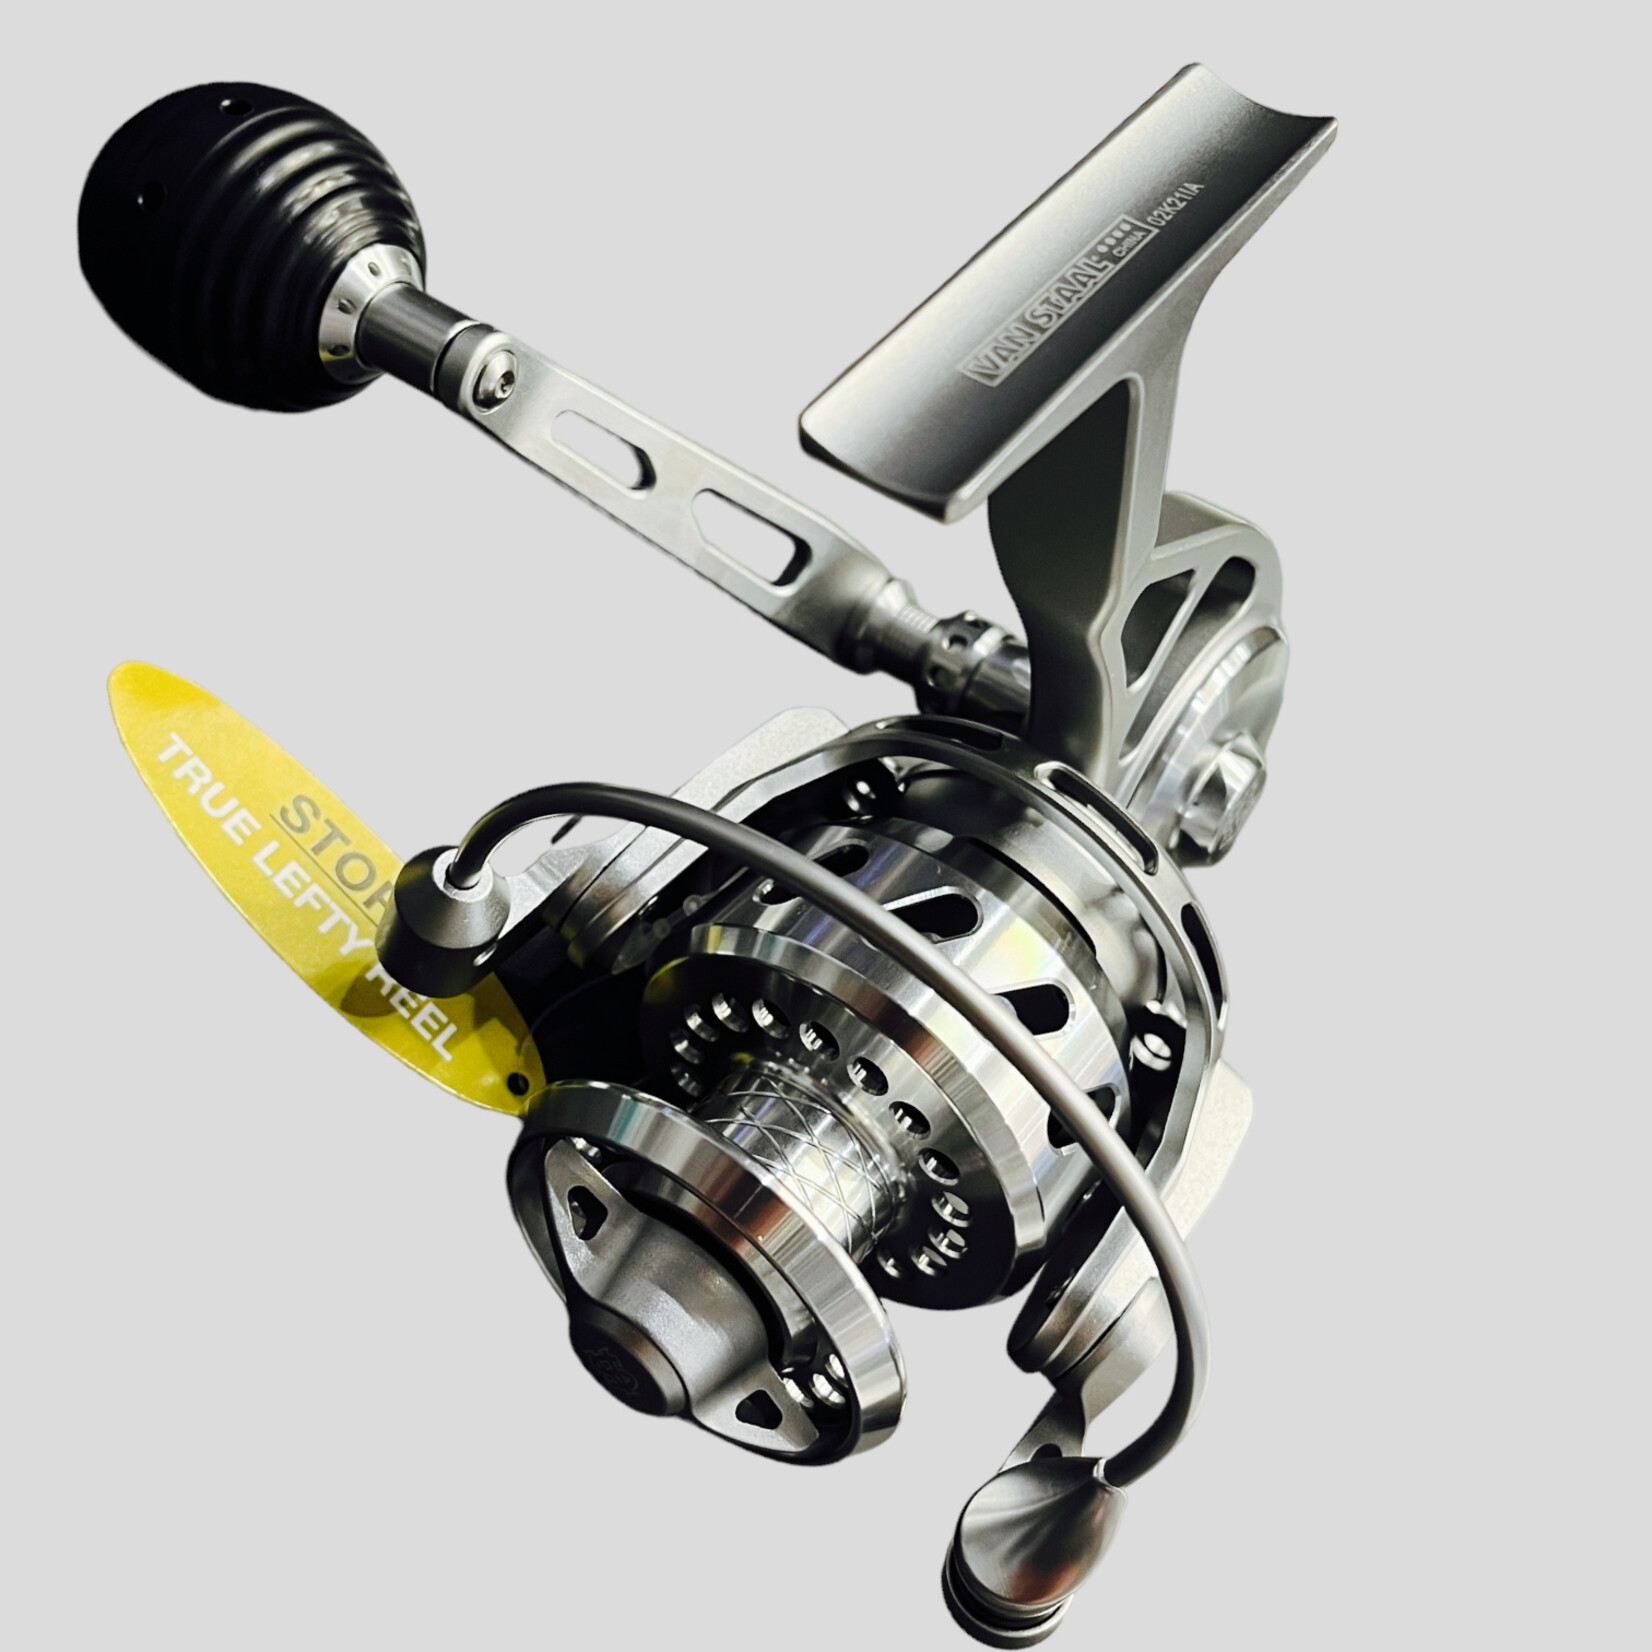 Black Van Staal VR75 Spinning Reels are back in stock! Great